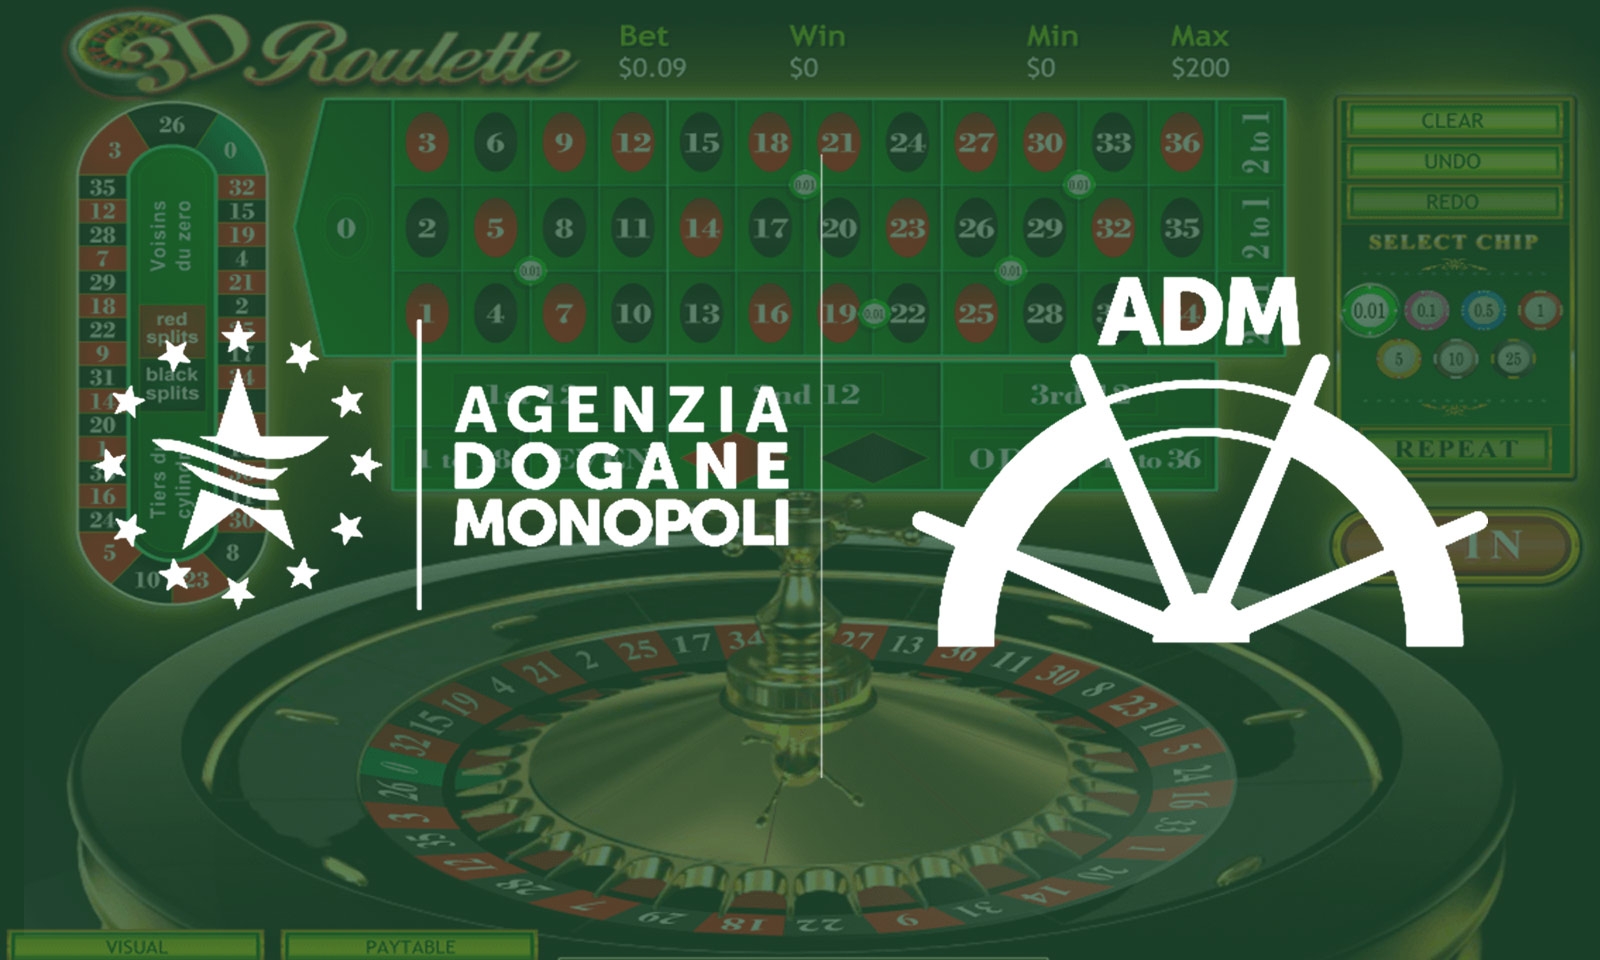 Certificazione roulette online AAMS ADM